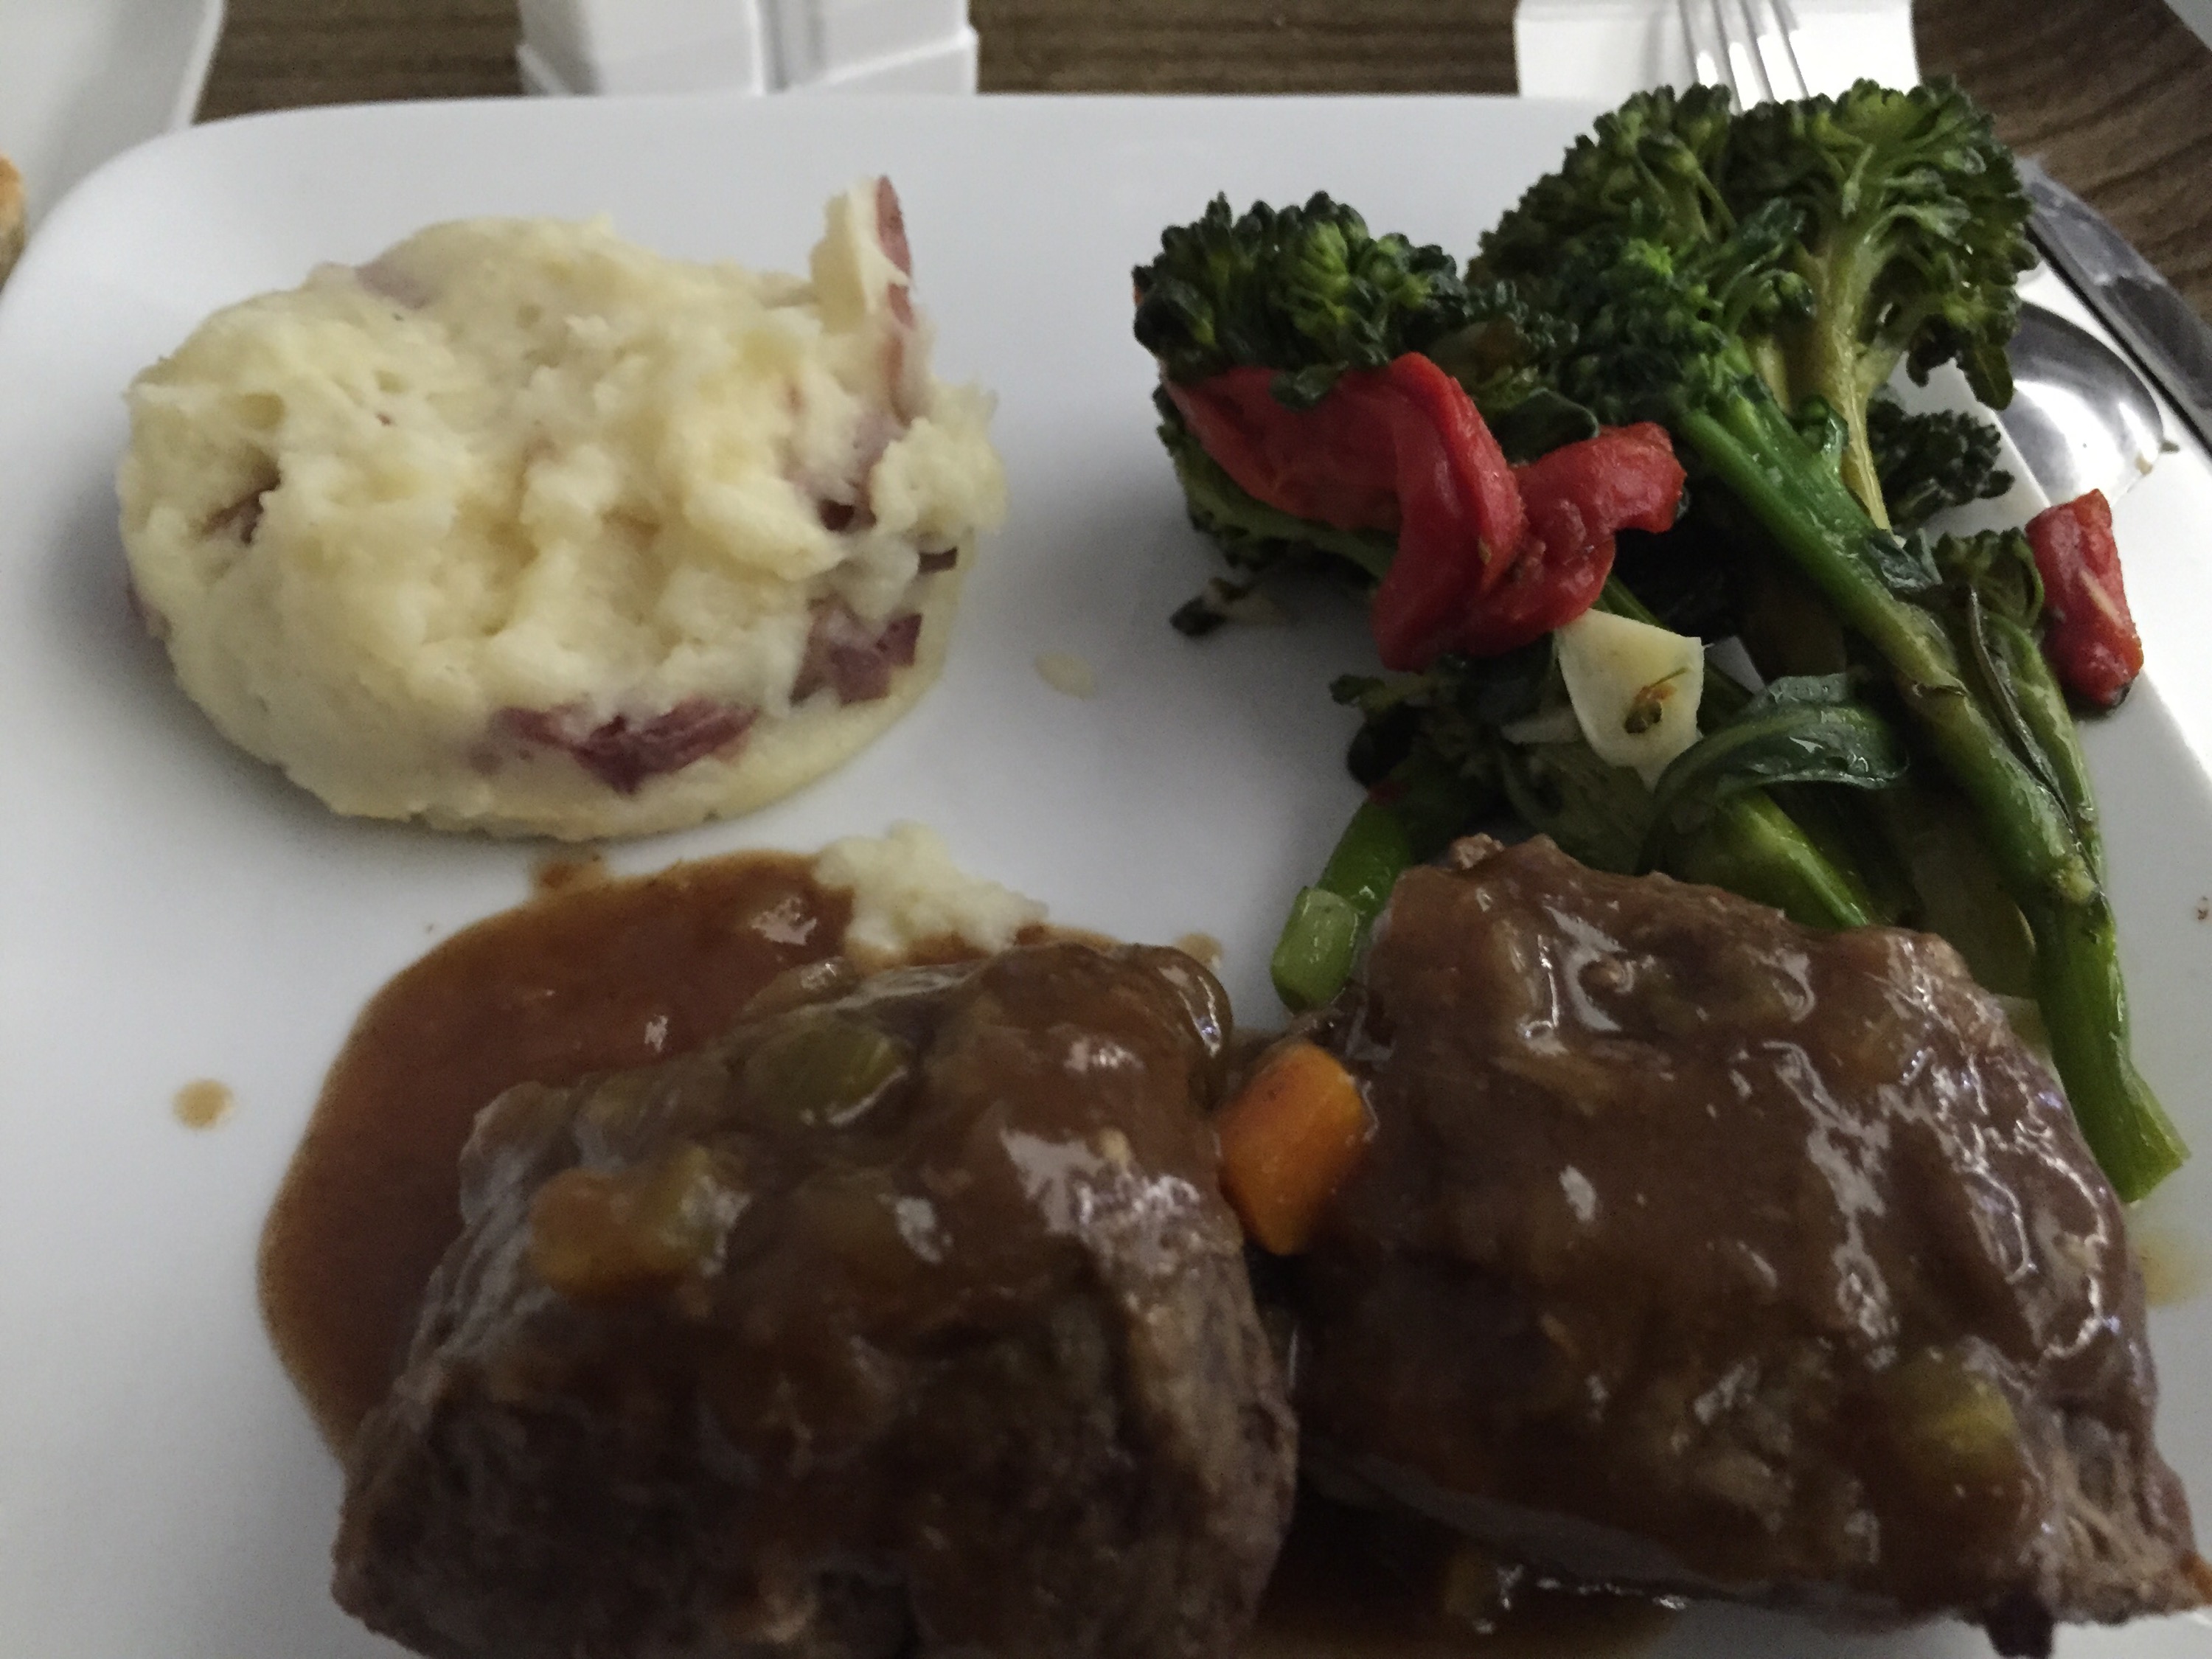 a plate of food with broccoli and mashed potatoes